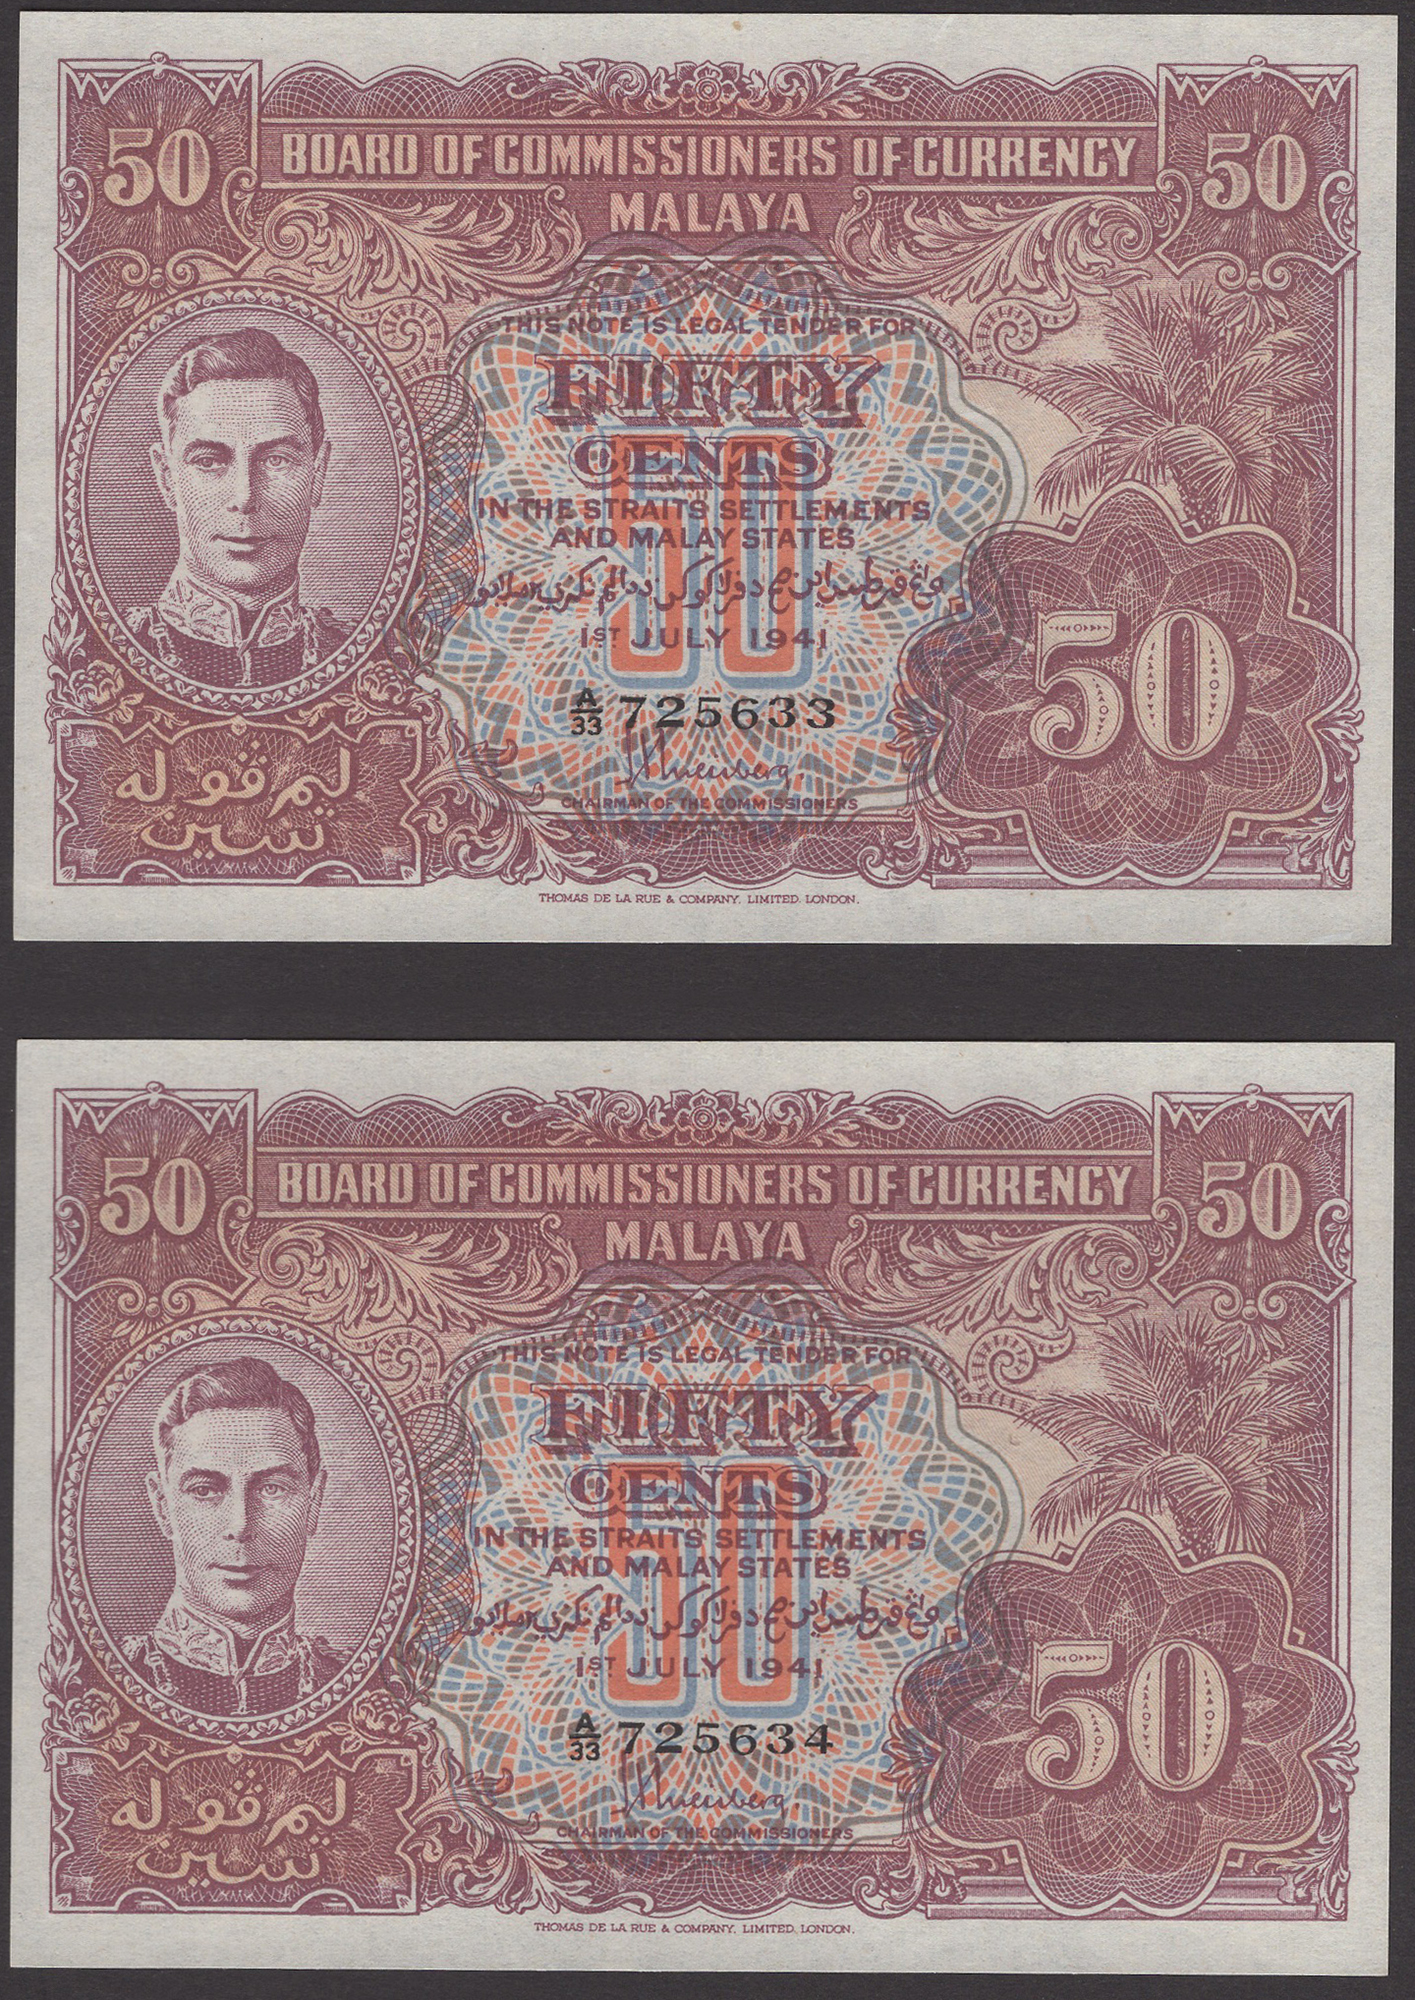 Board of Commissioners of Currency Malaya, 50 Cents (2), 1 July 1941, serial numbers A/33...